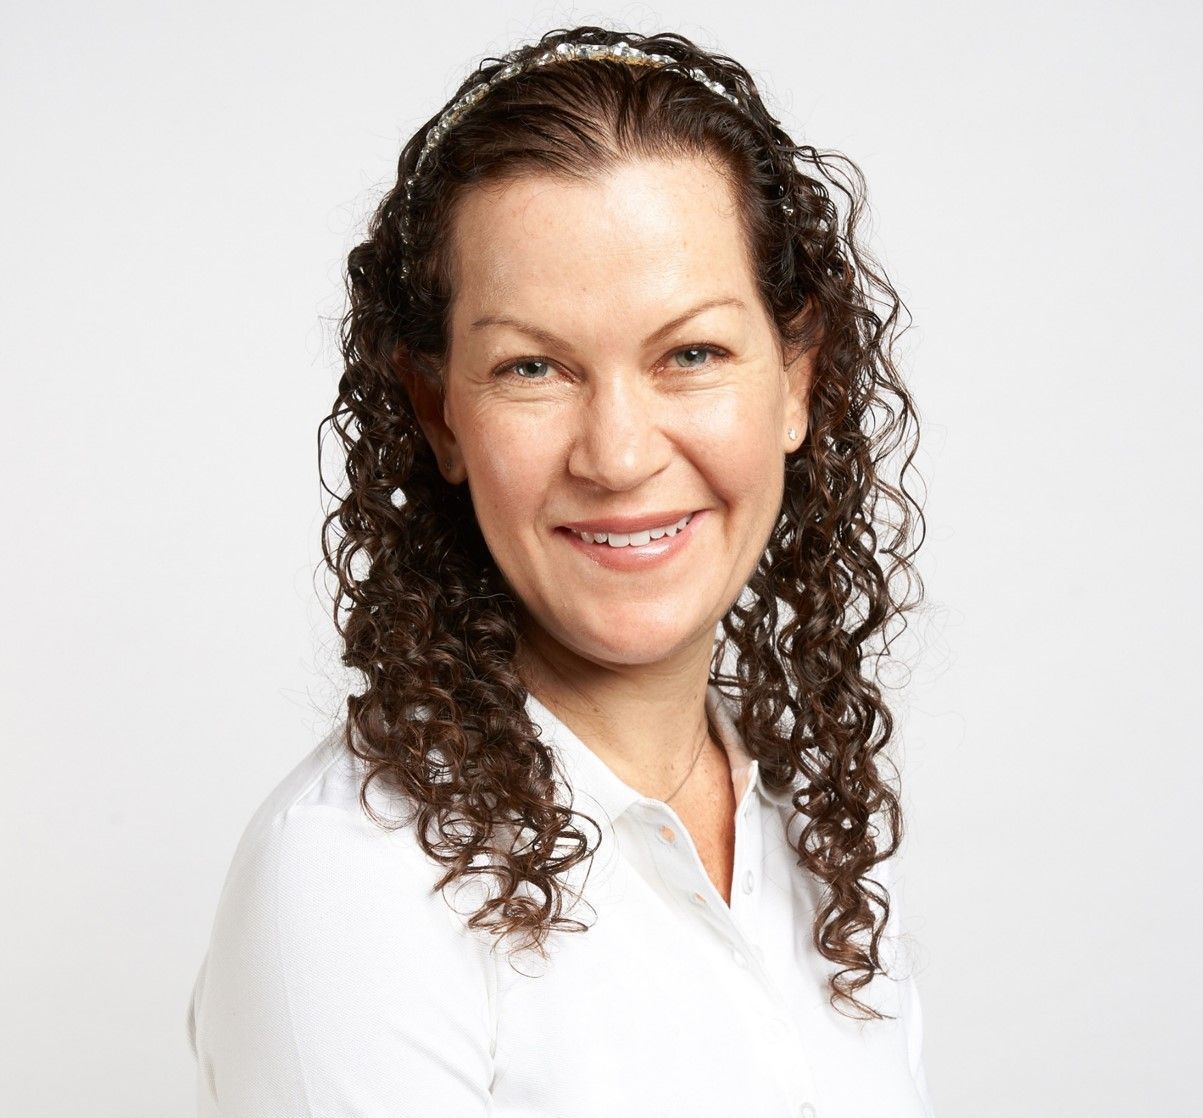 Food Frontier appoints APD Teri Lichtenstein to Advisory Council